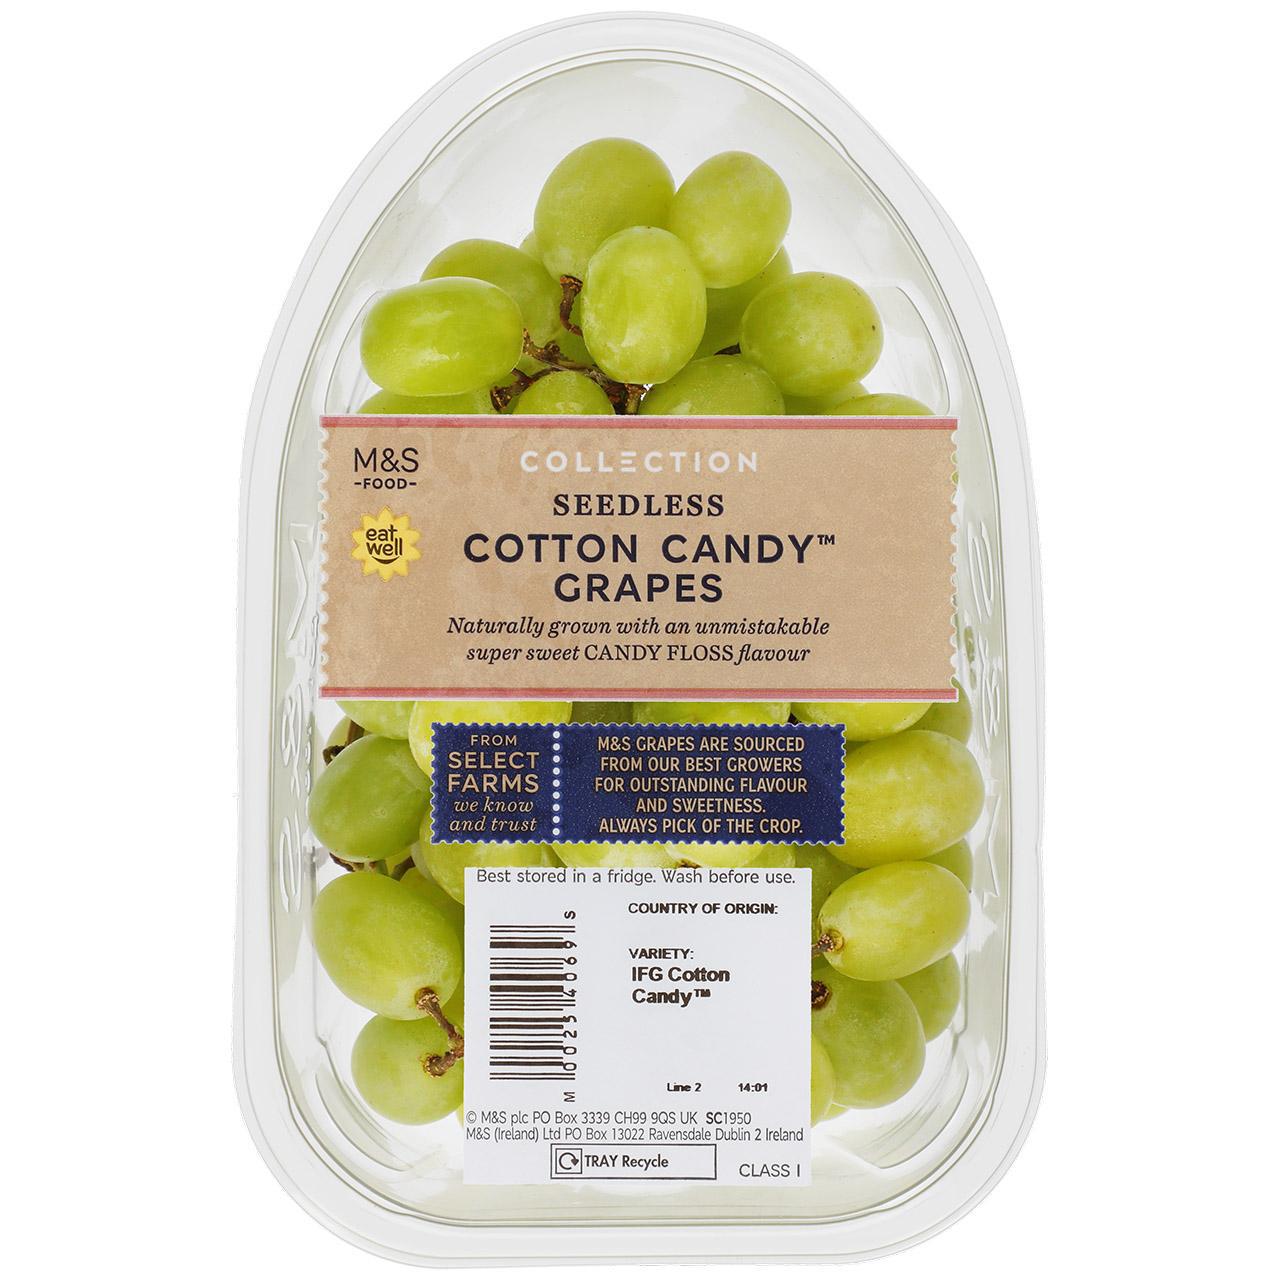 M&S Cotton Candy Seedless Grapes 400g